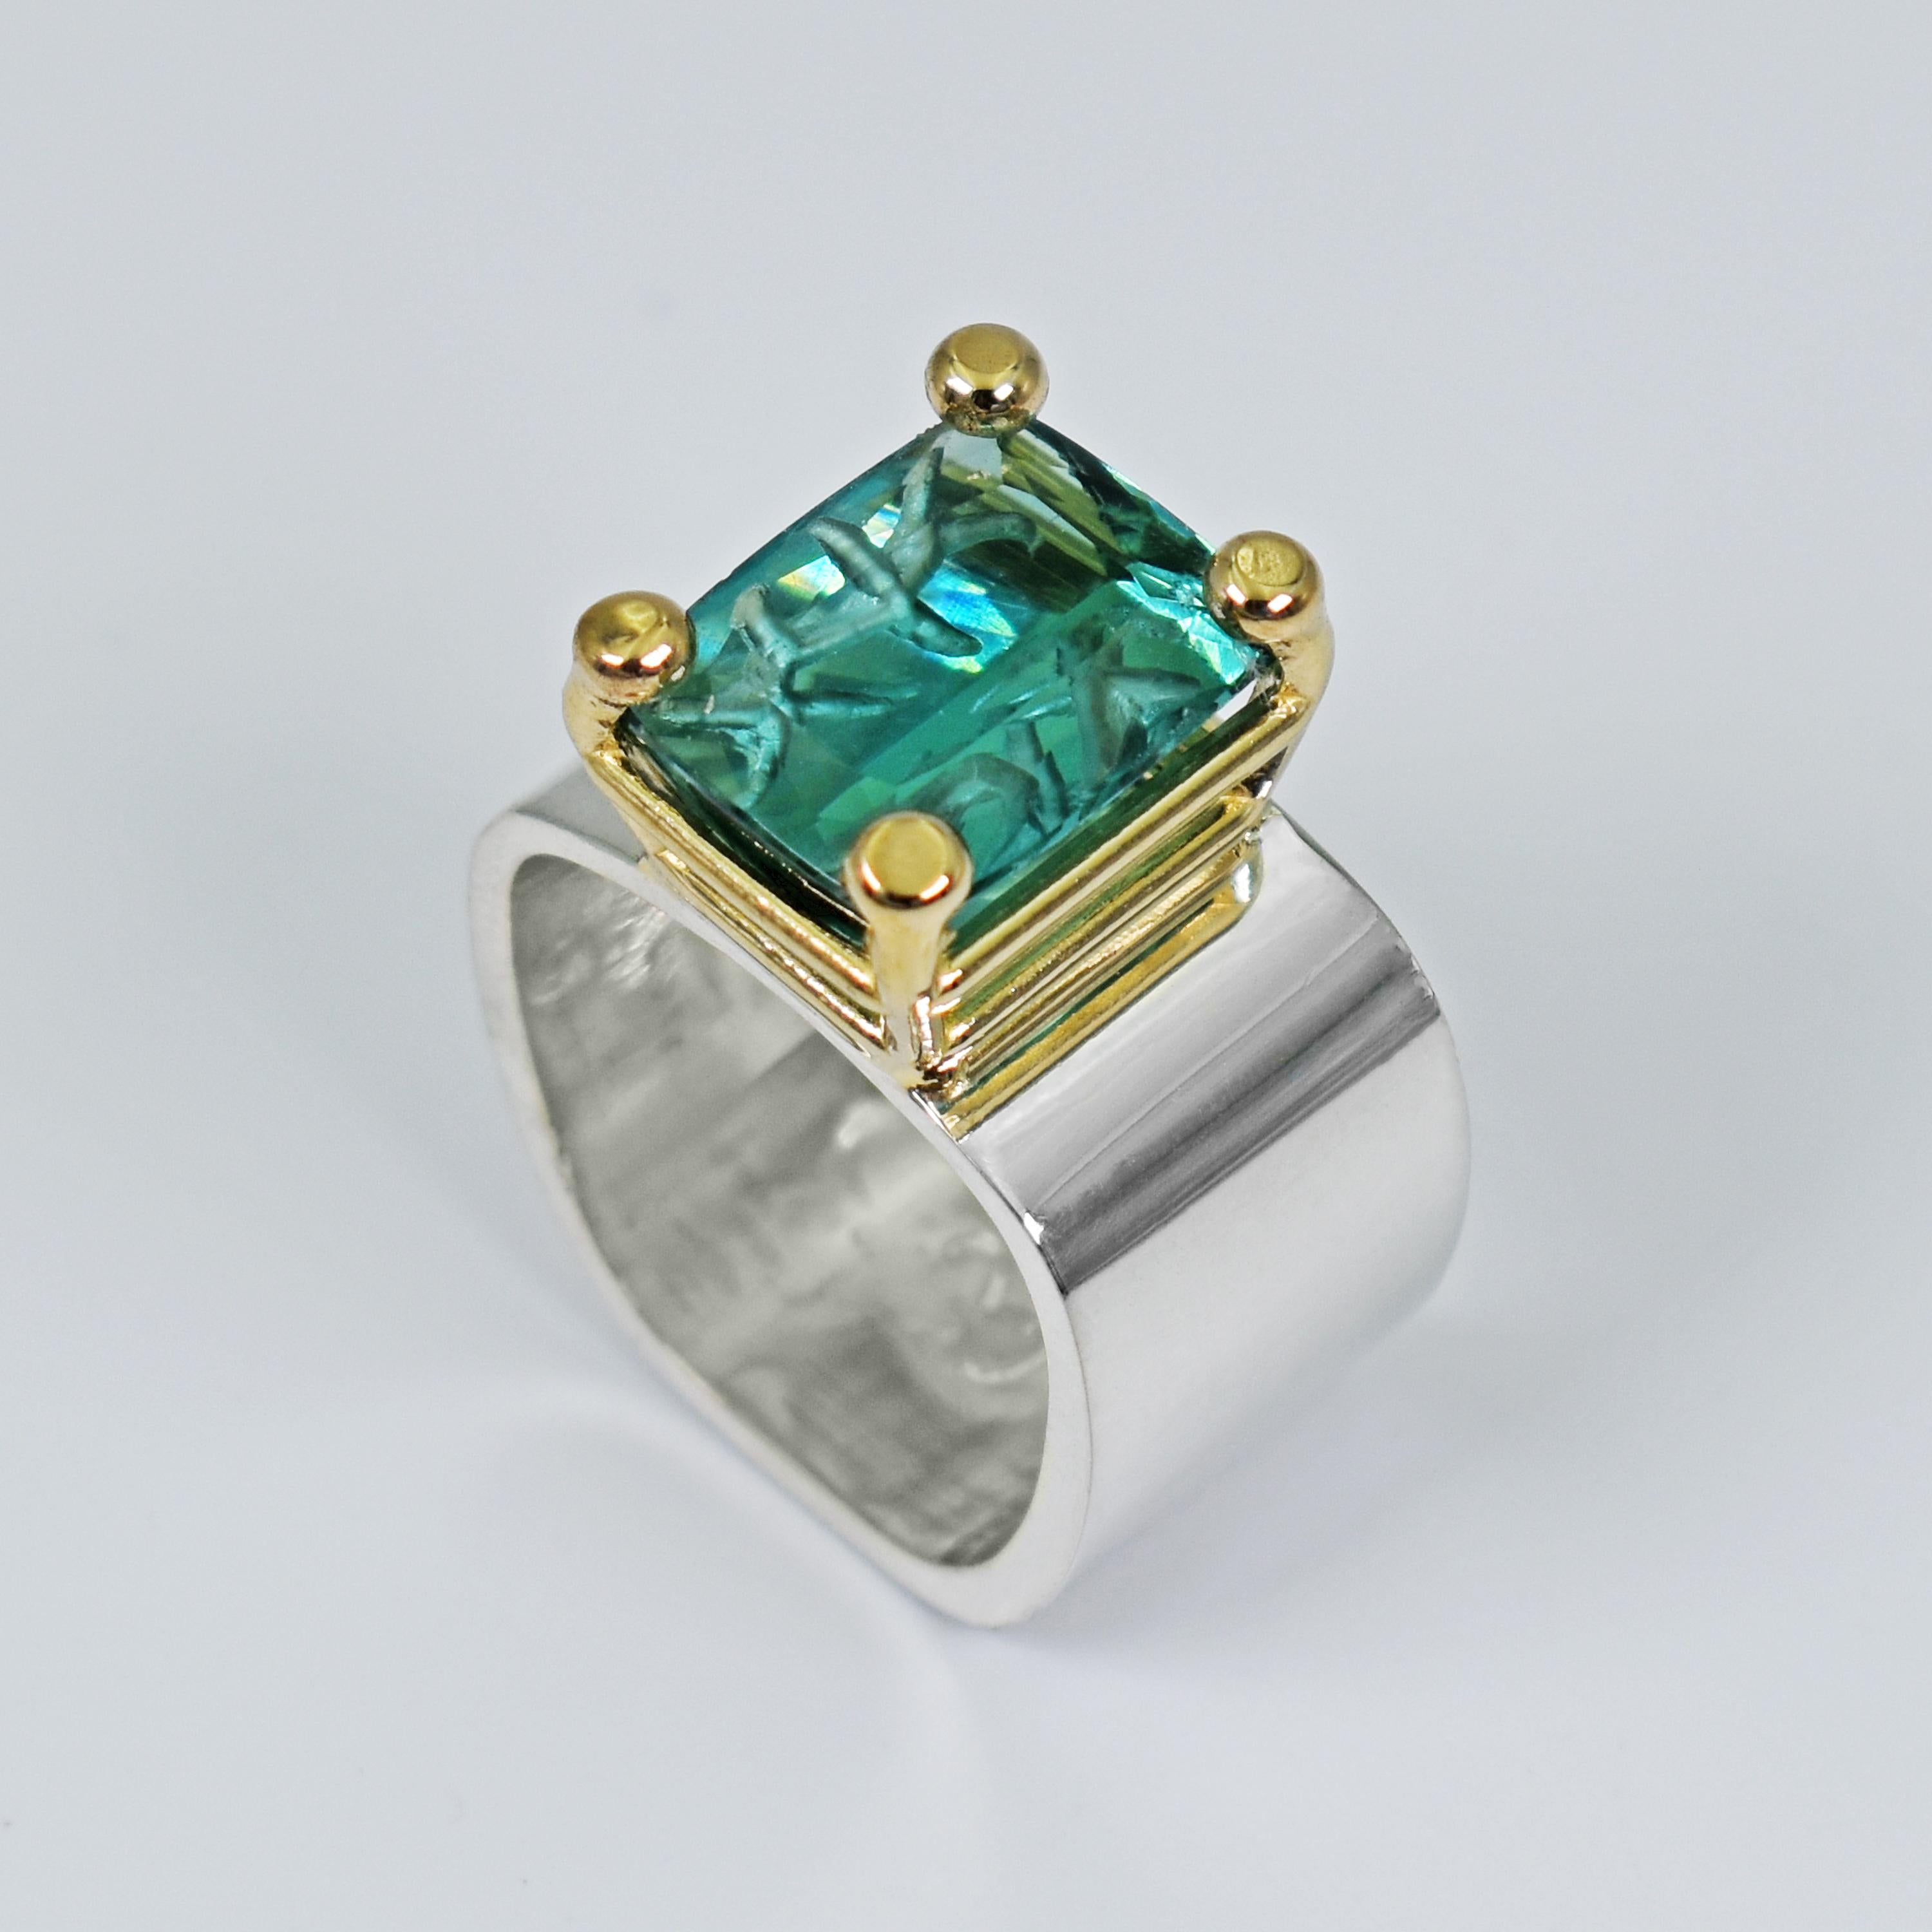 Women's Carved 5.39 Carat Indicolite Tourmaline Two-Tone Cocktail Ring